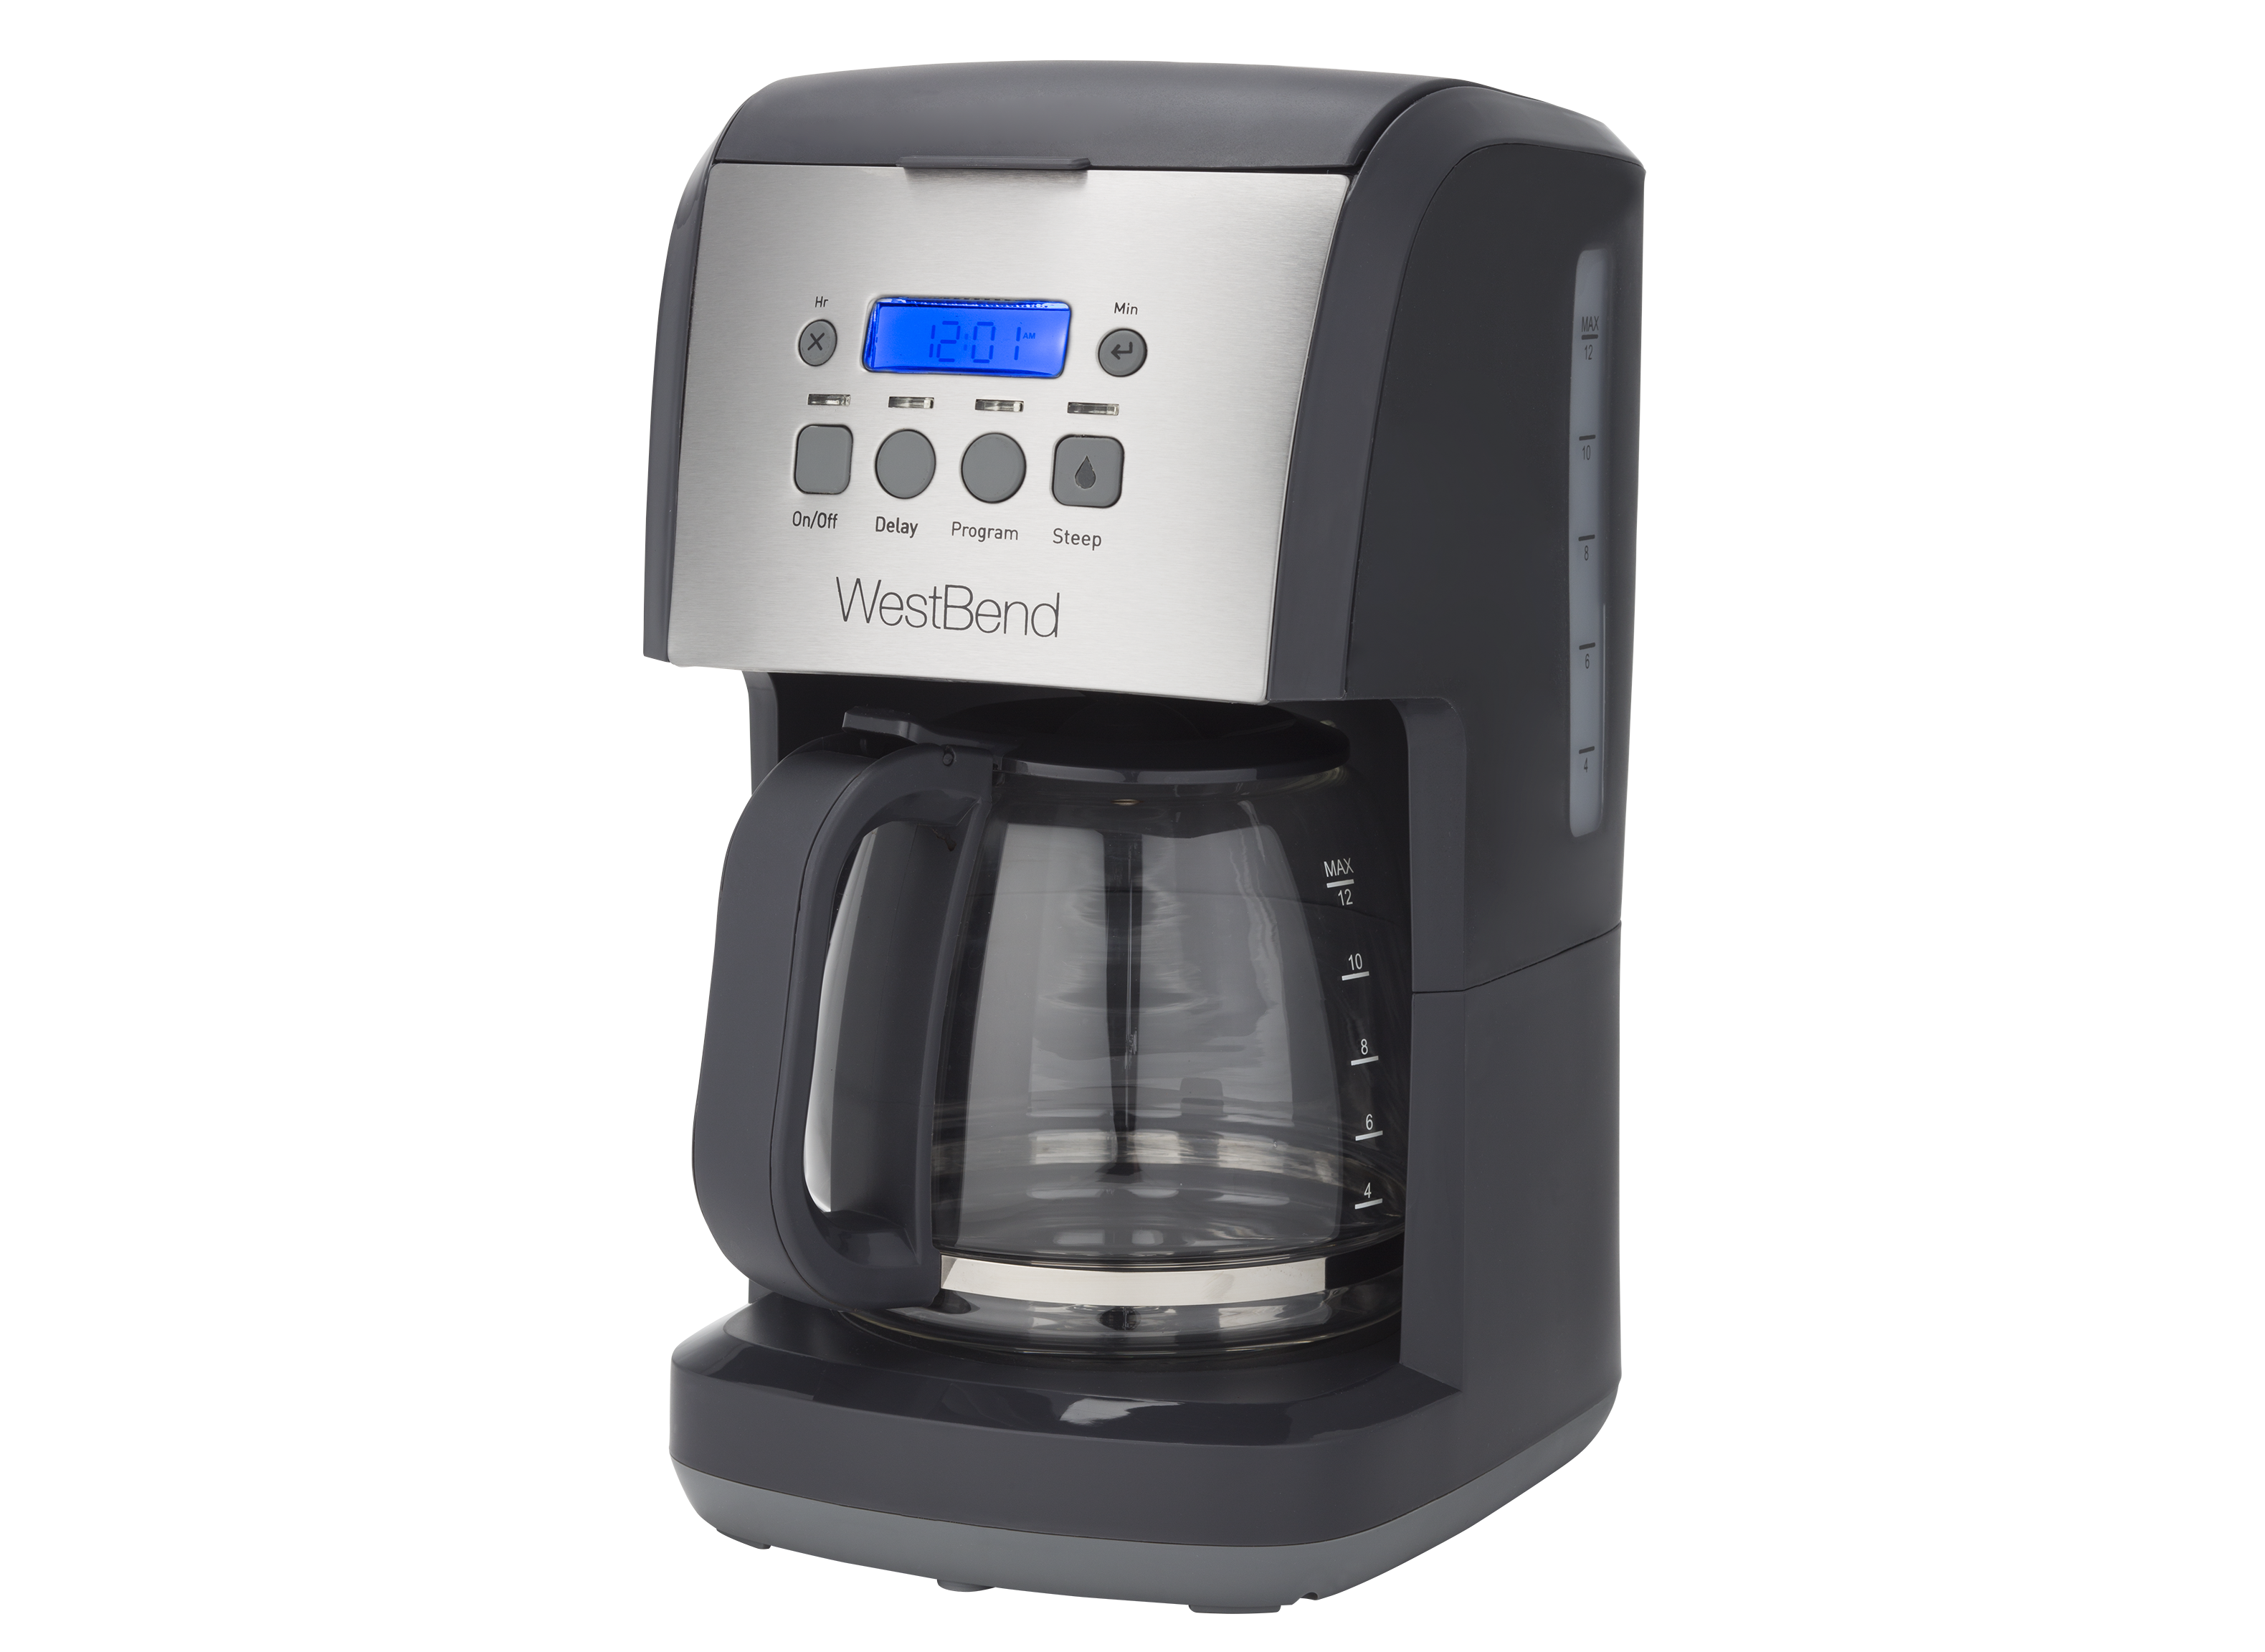 https://crdms.images.consumerreports.org/prod/products/cr/models/388213-coffeemakers-westbend-steepbrew12cup56911.png